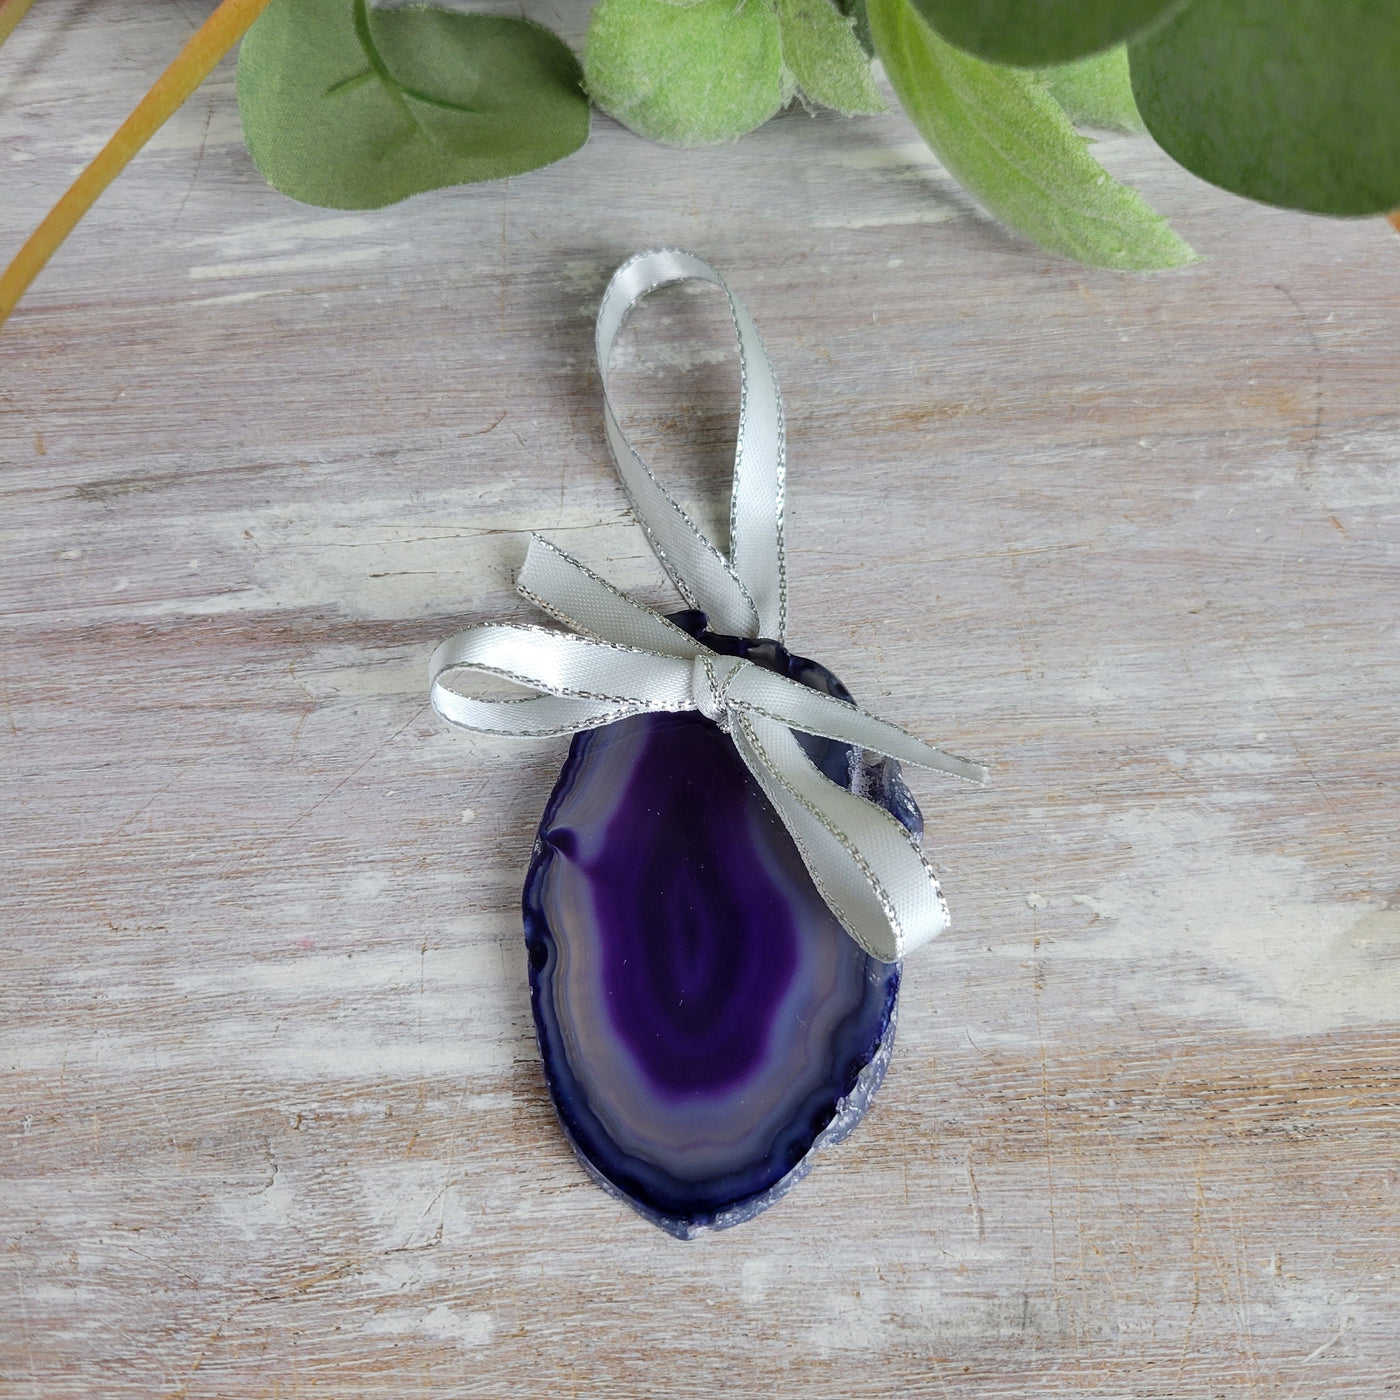 Agate Slice Ornament 3.5" with Ribbon - Pink Blue, Purple, Natural, Teal